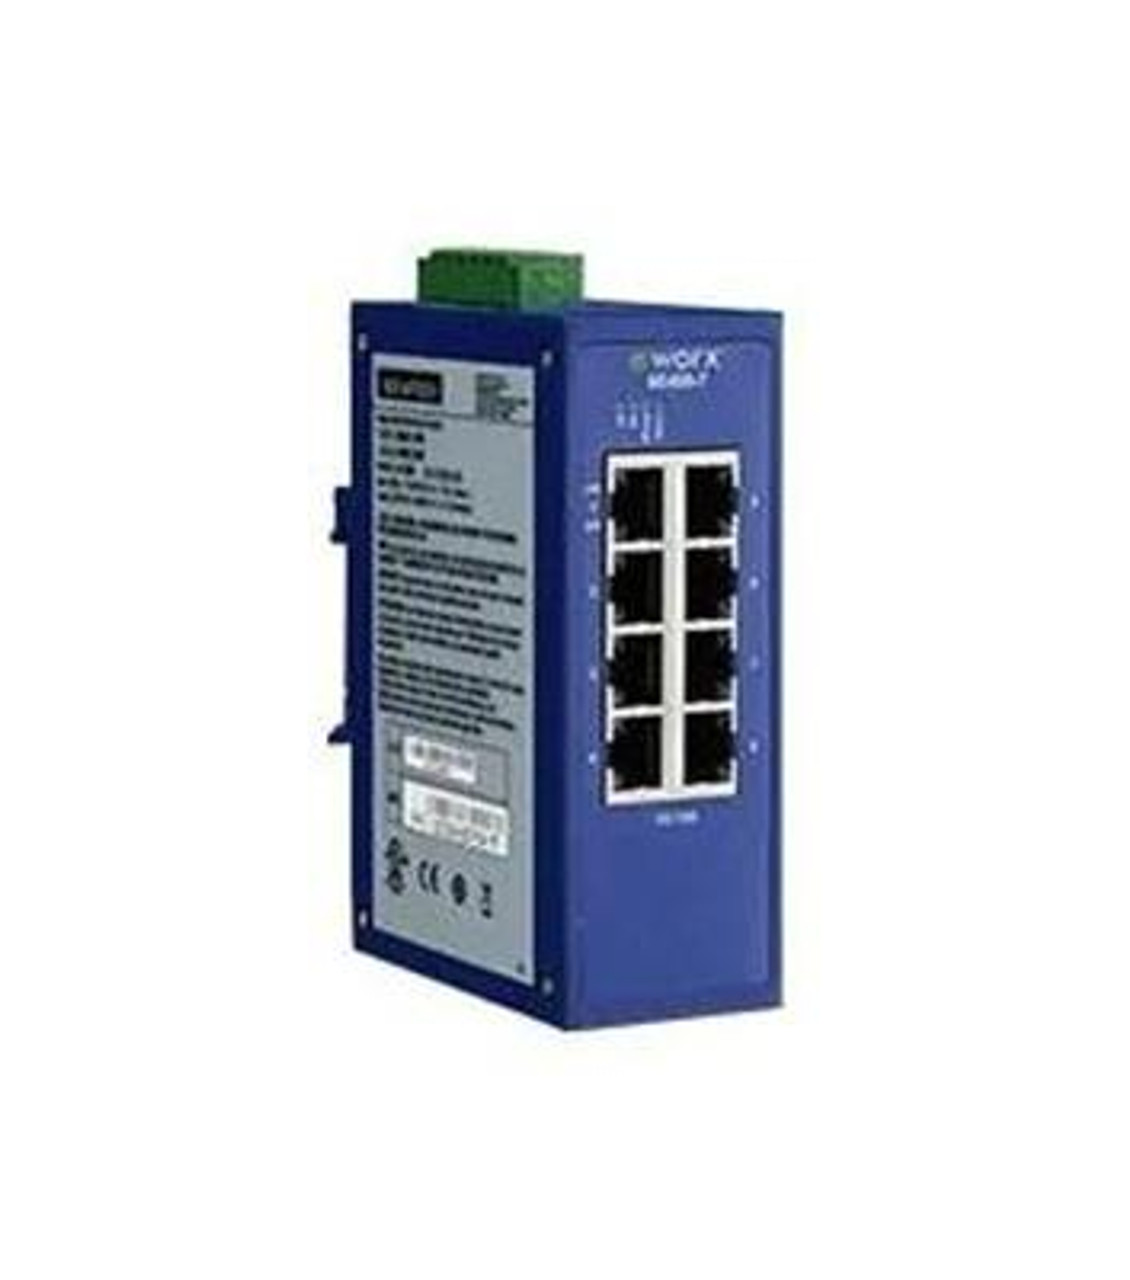 SE408-T B+B SmartWorx eWorx SE408-T Ethernet Switch - 8 Ports - Manageable - 2 Layer Supported - Twisted Pair - DIN Rail Mountable, Wall Mountable -